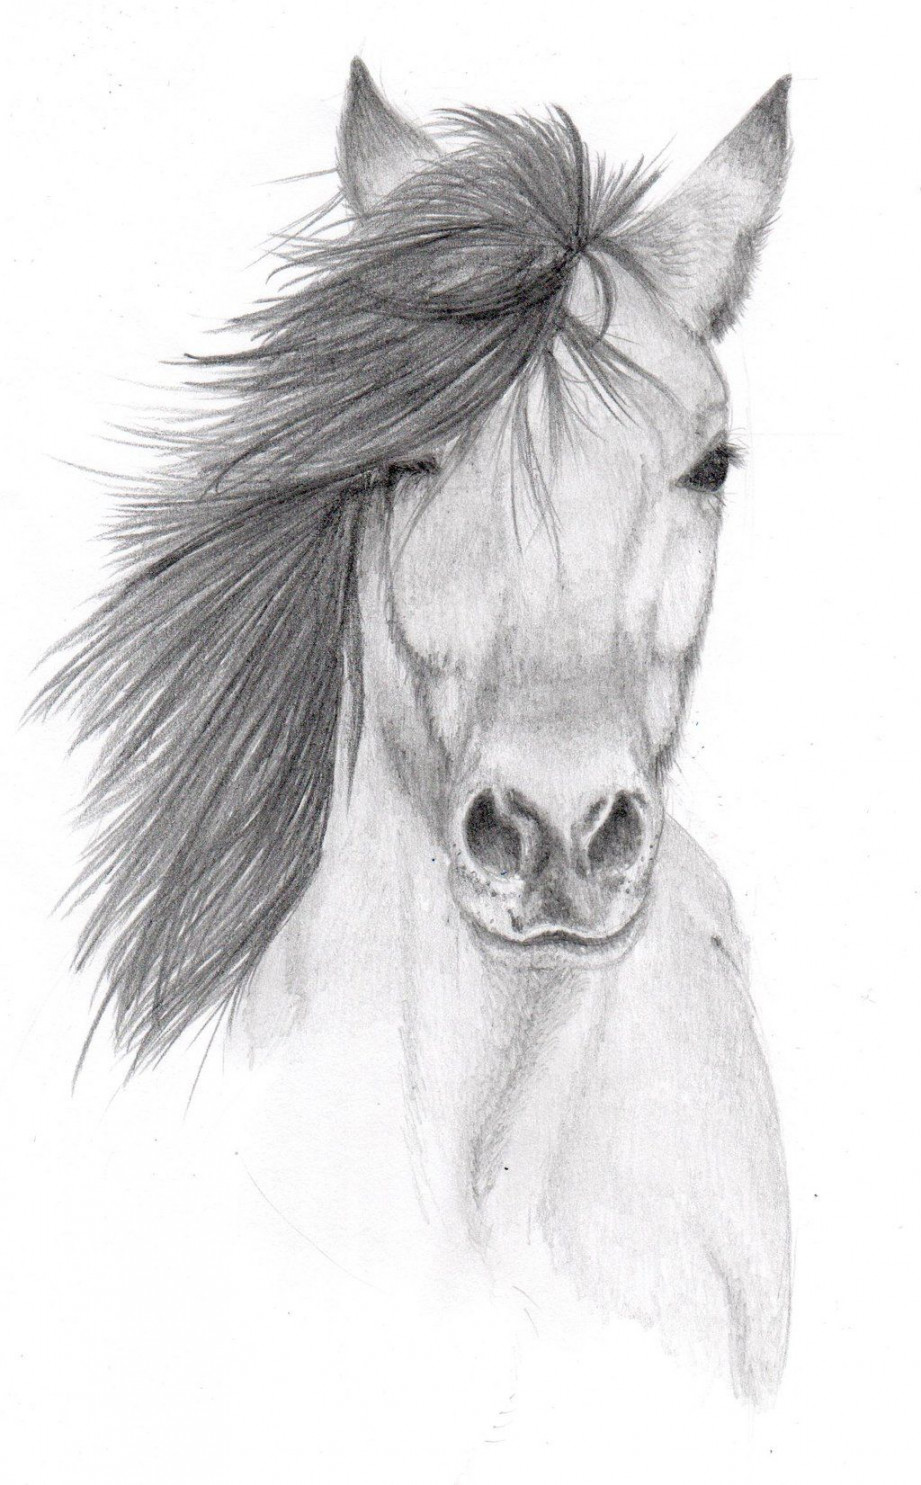 Horse drawing  Horse drawings, Pencil sketches of animals, Pencil